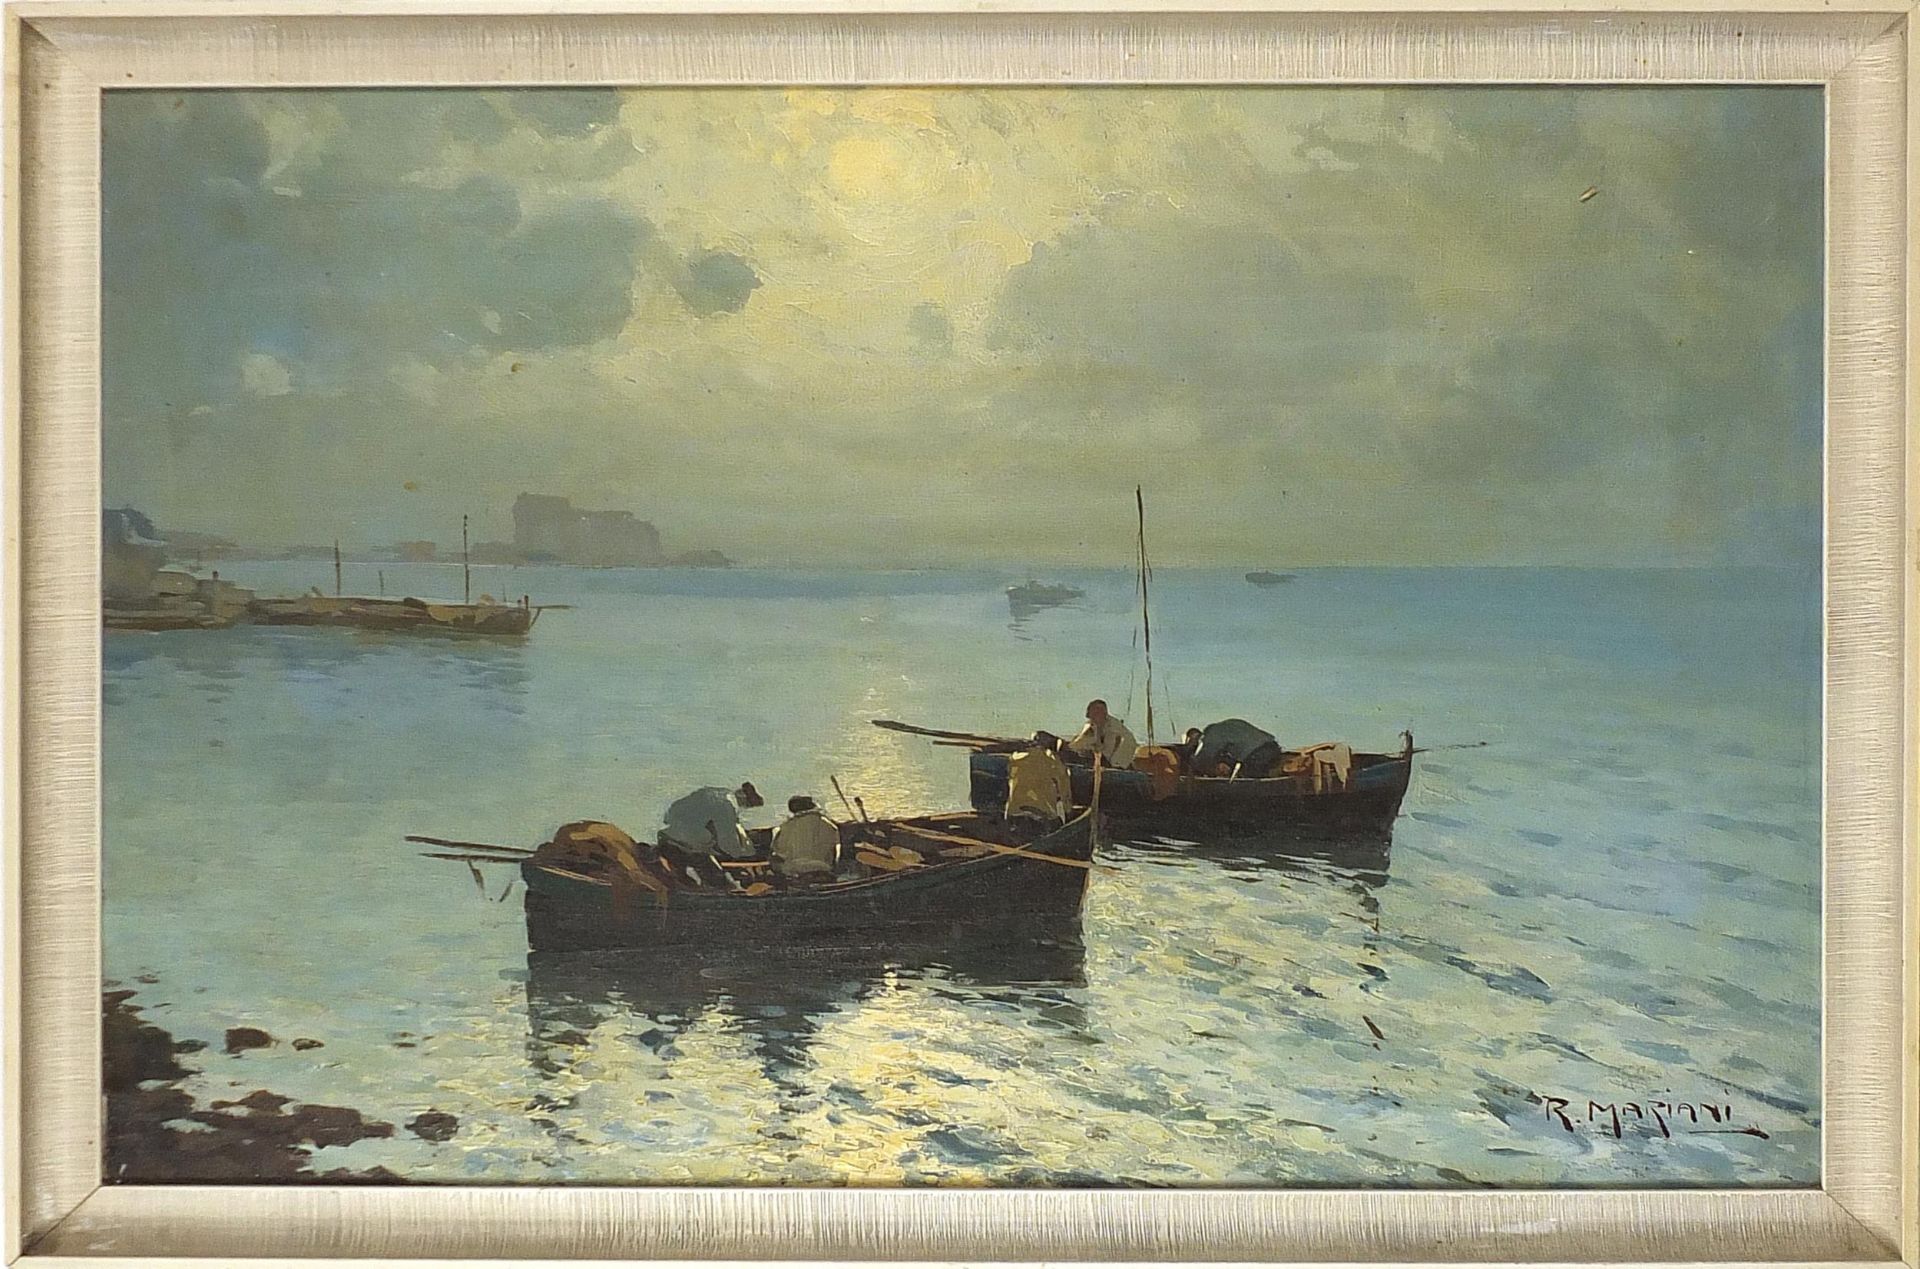 R Mariani - Figures in boats on water, Italian school oil on canvas, framed, 68cm x 48cm excluding - Image 2 of 4